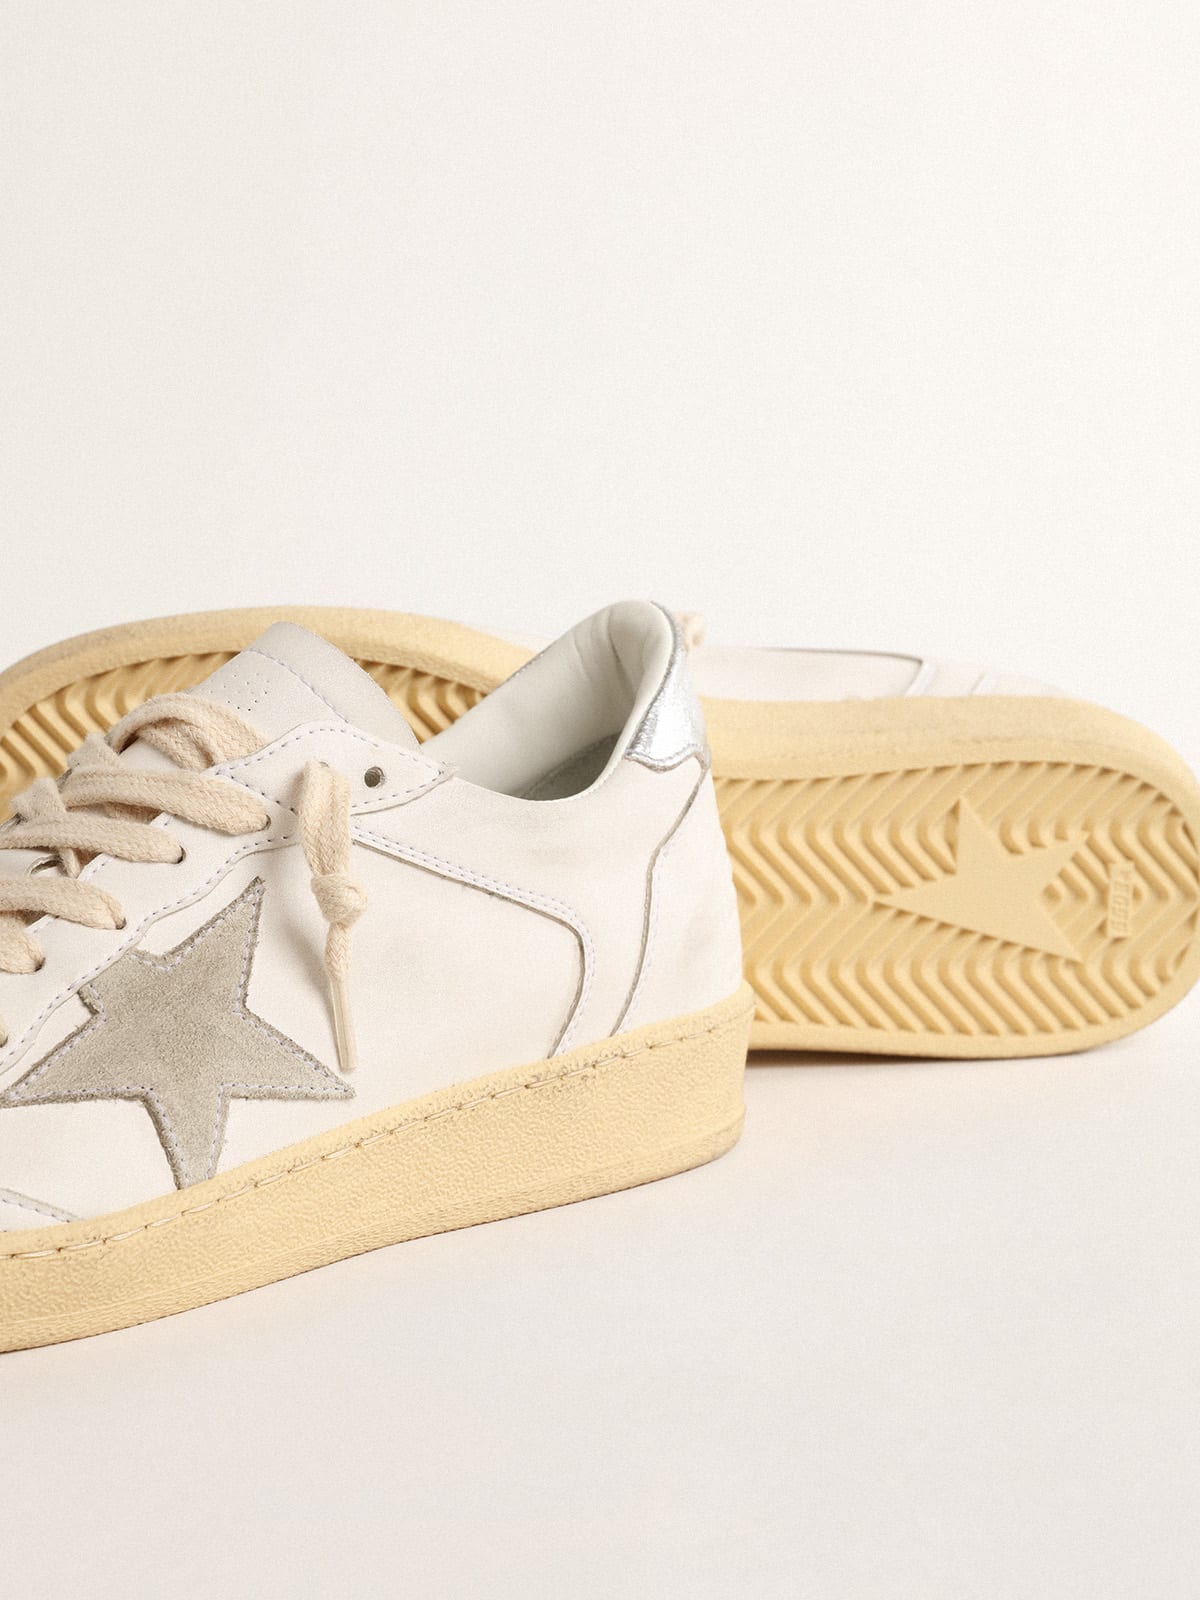 Golden Goose - Ball Star with suede star and metallic leather heel tab in 